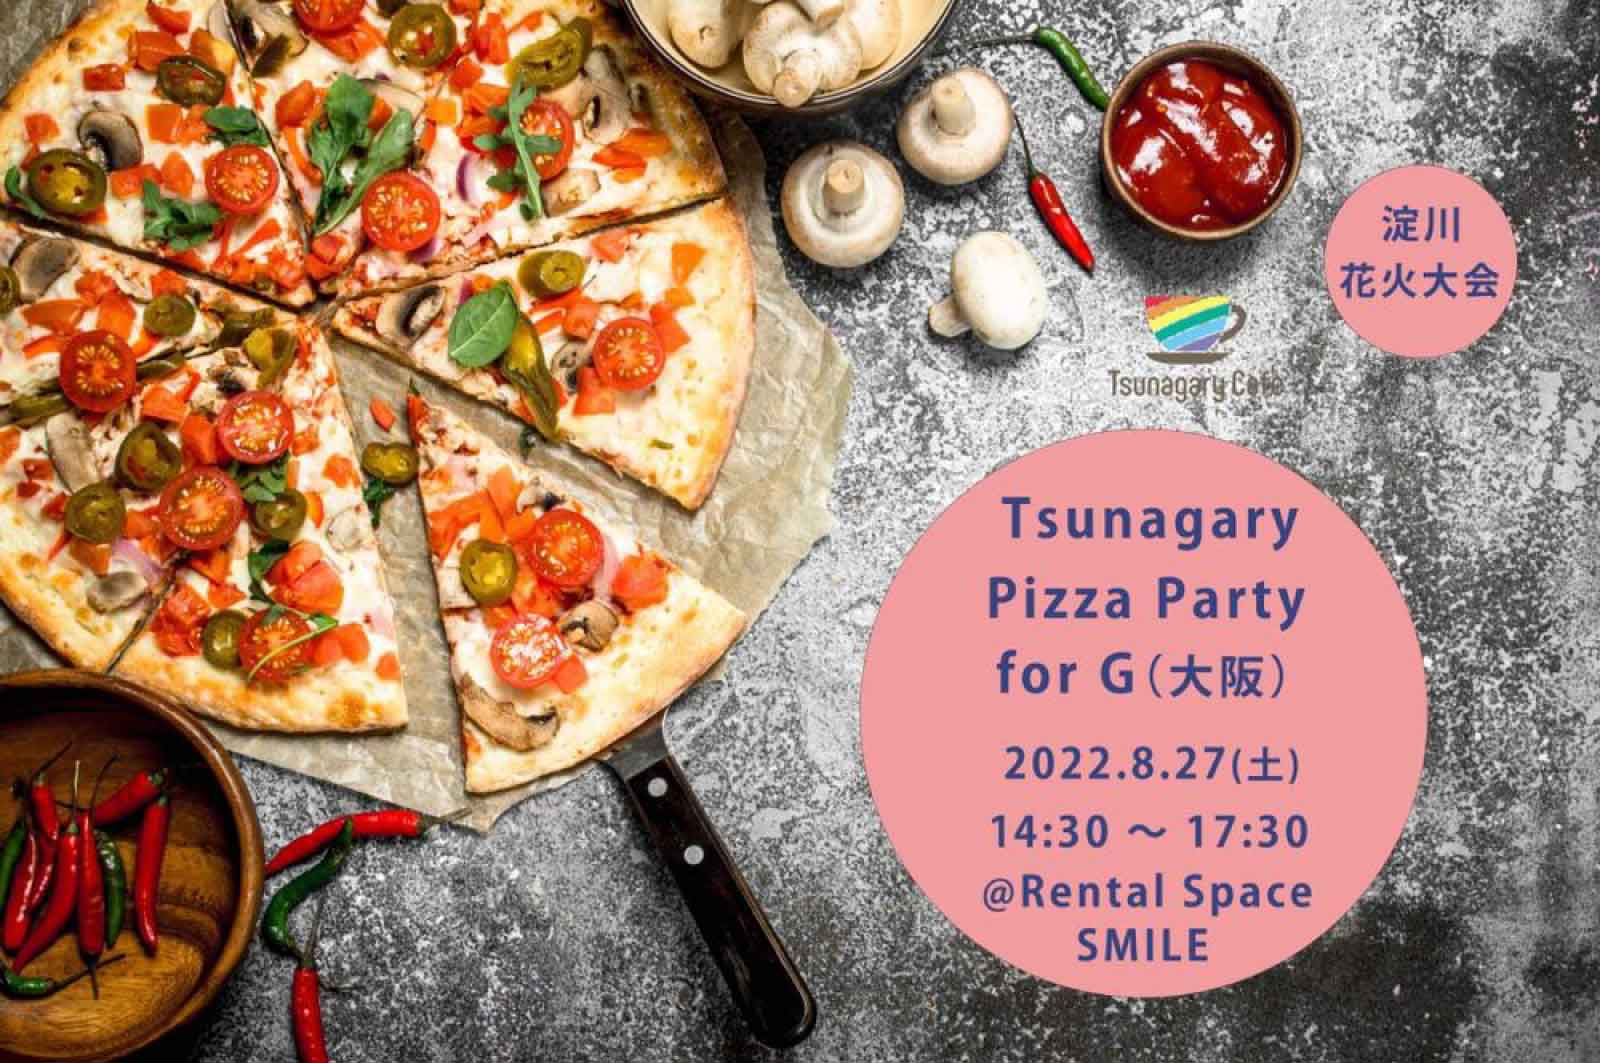 Tsunagary Pizza Party for G